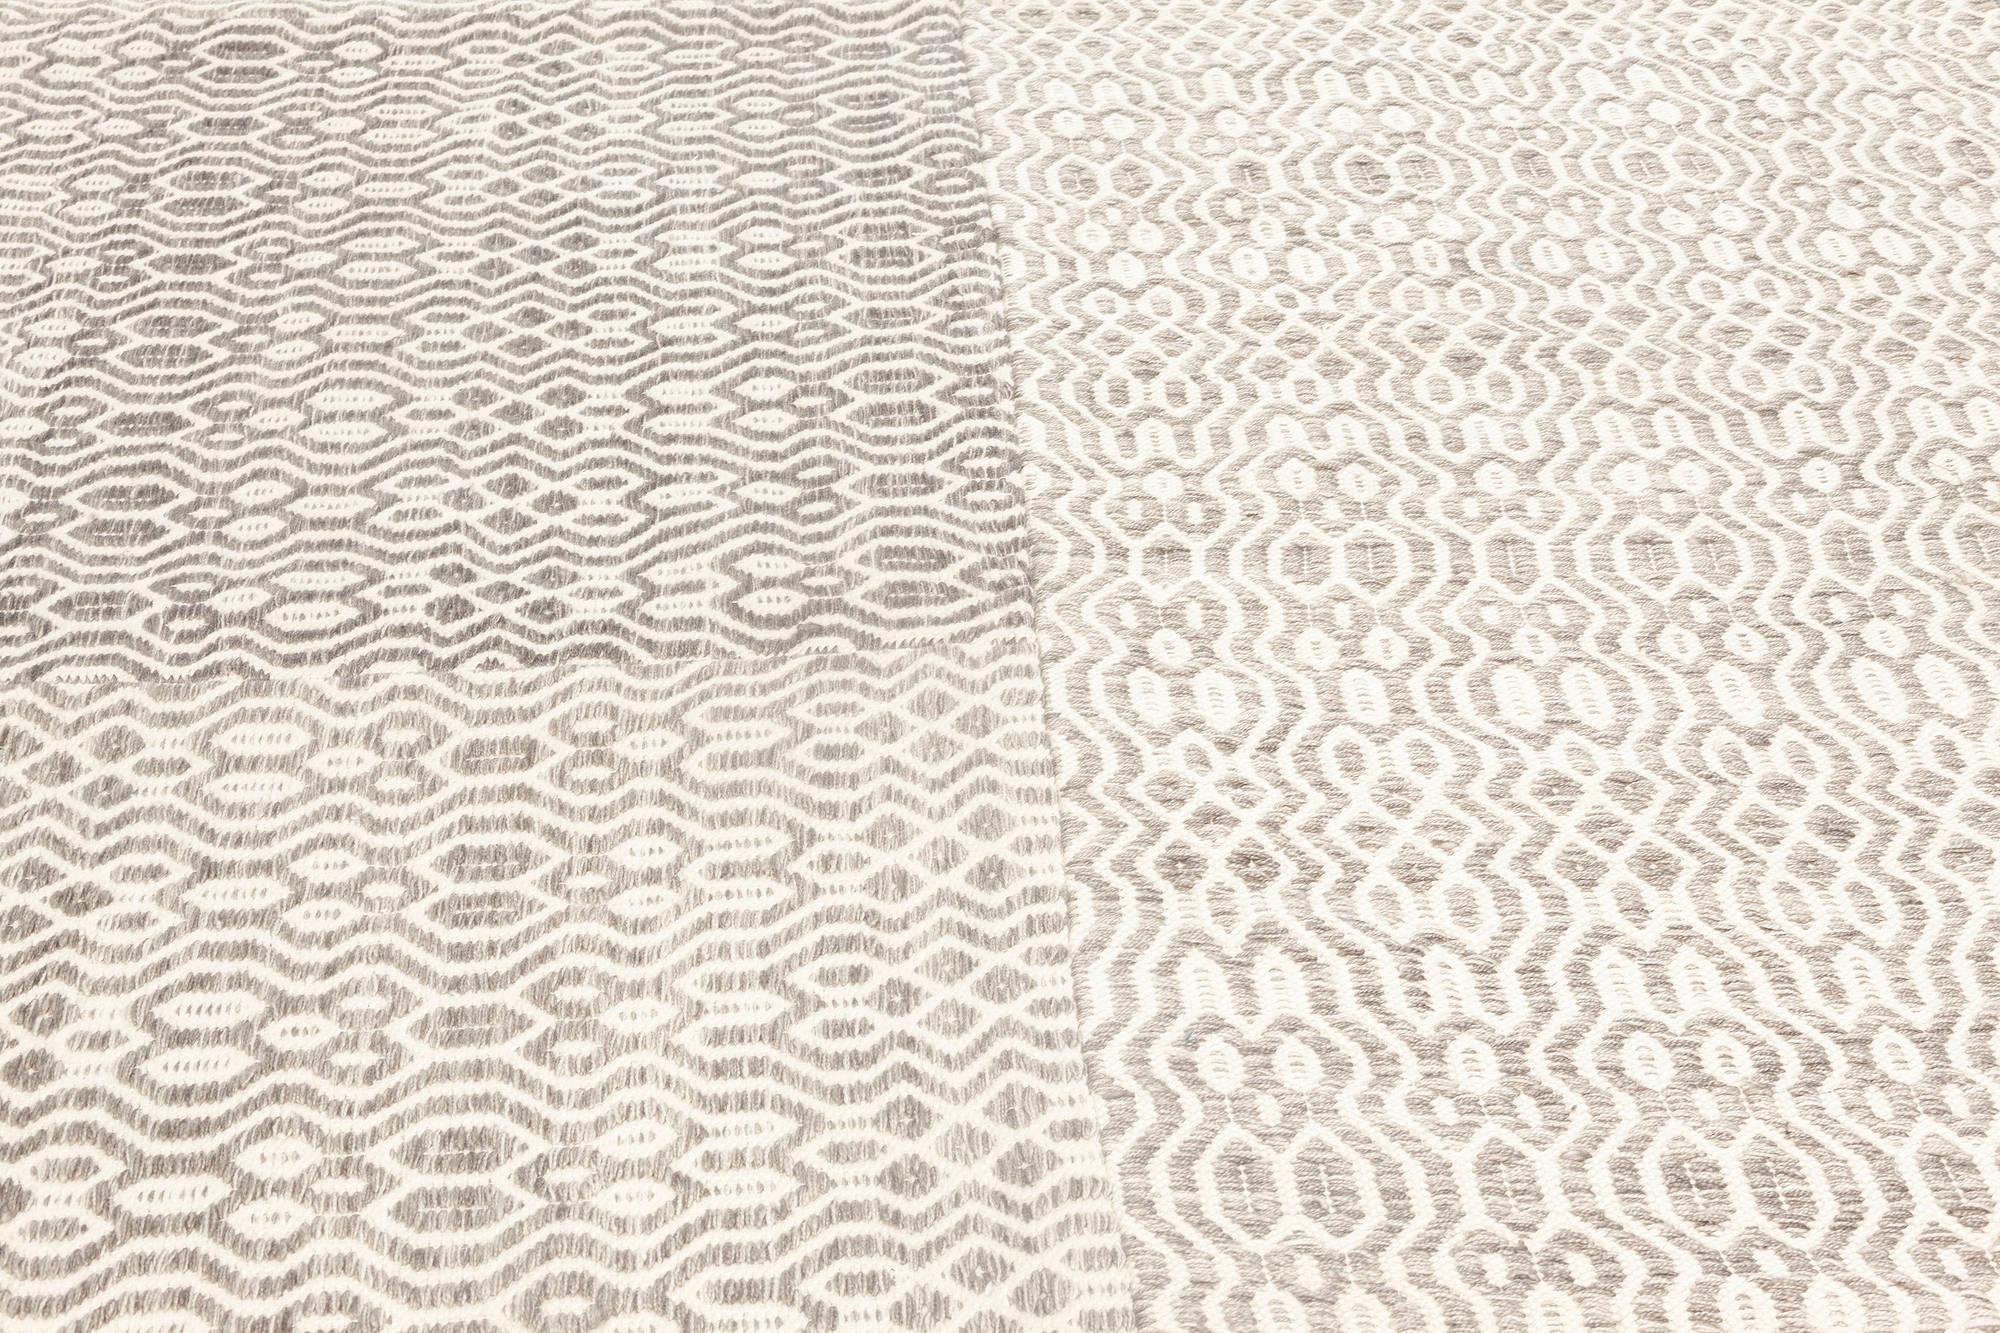 Contemporary White and Gray Flat-Weave Wool Rug by Doris Leslie Blau In New Condition For Sale In New York, NY